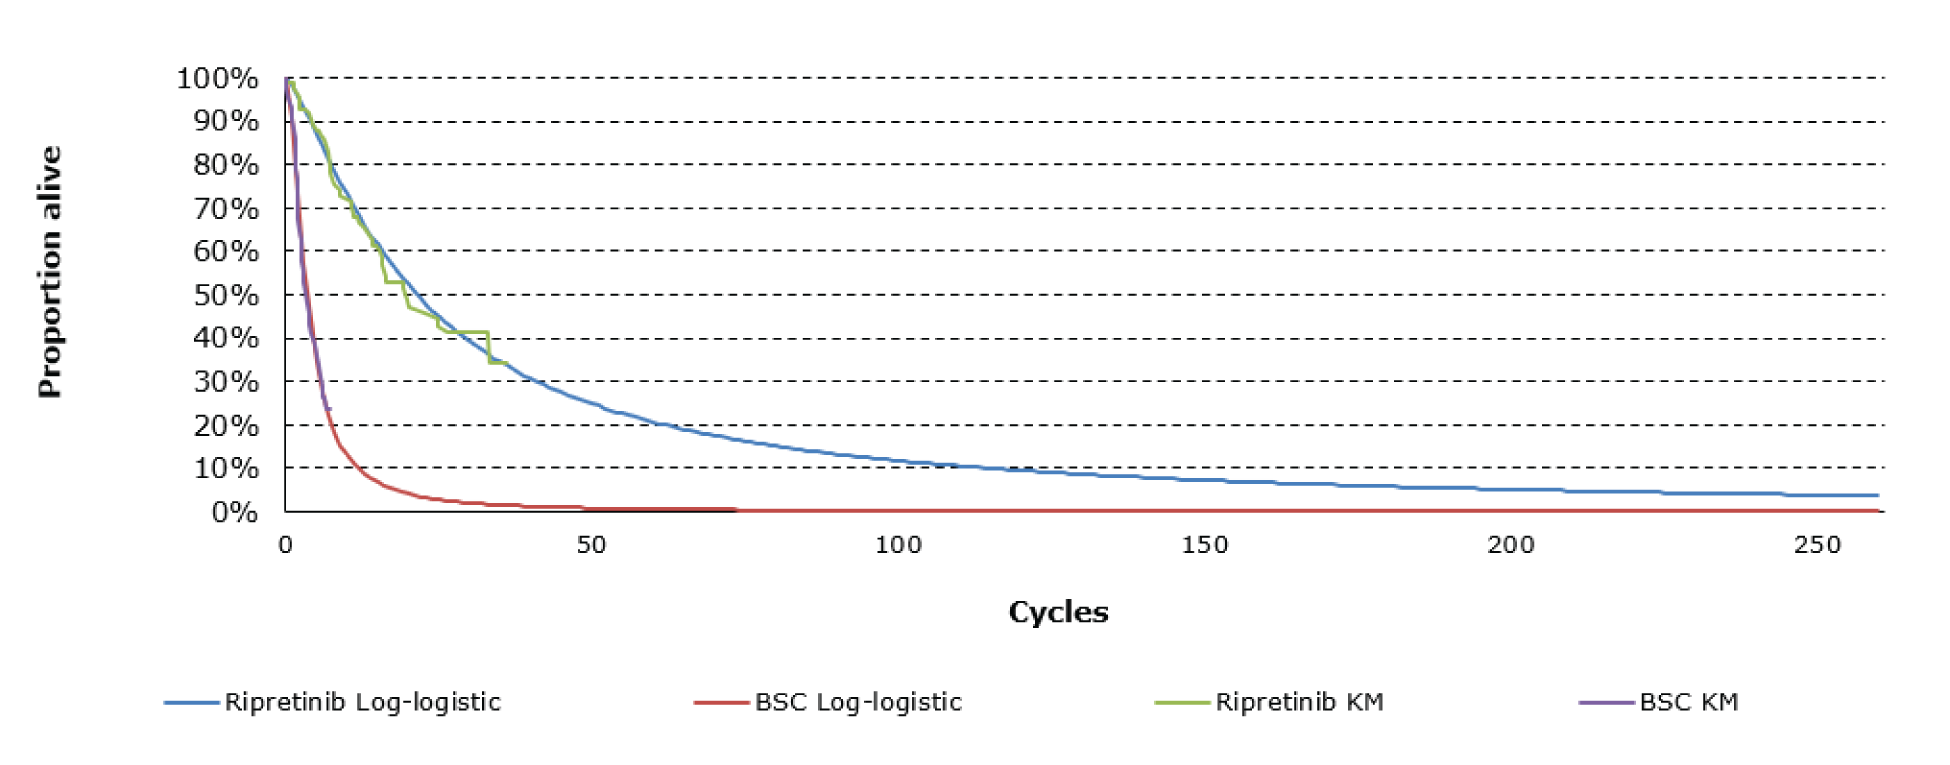 Two Kaplan-Meier curves for overall survival of ripretinib and best supportive care. The lower of the 2 curves is best supportive care and the higher is ripretinib. Both Kaplan-Meier curves are based on the INVICTUS trial (N = 129; mean age = 60 years). Survival curves were statistically fitted to the observed Kaplan-Meier survival data and used to extrapolate progression-free survival beyond the trial period.